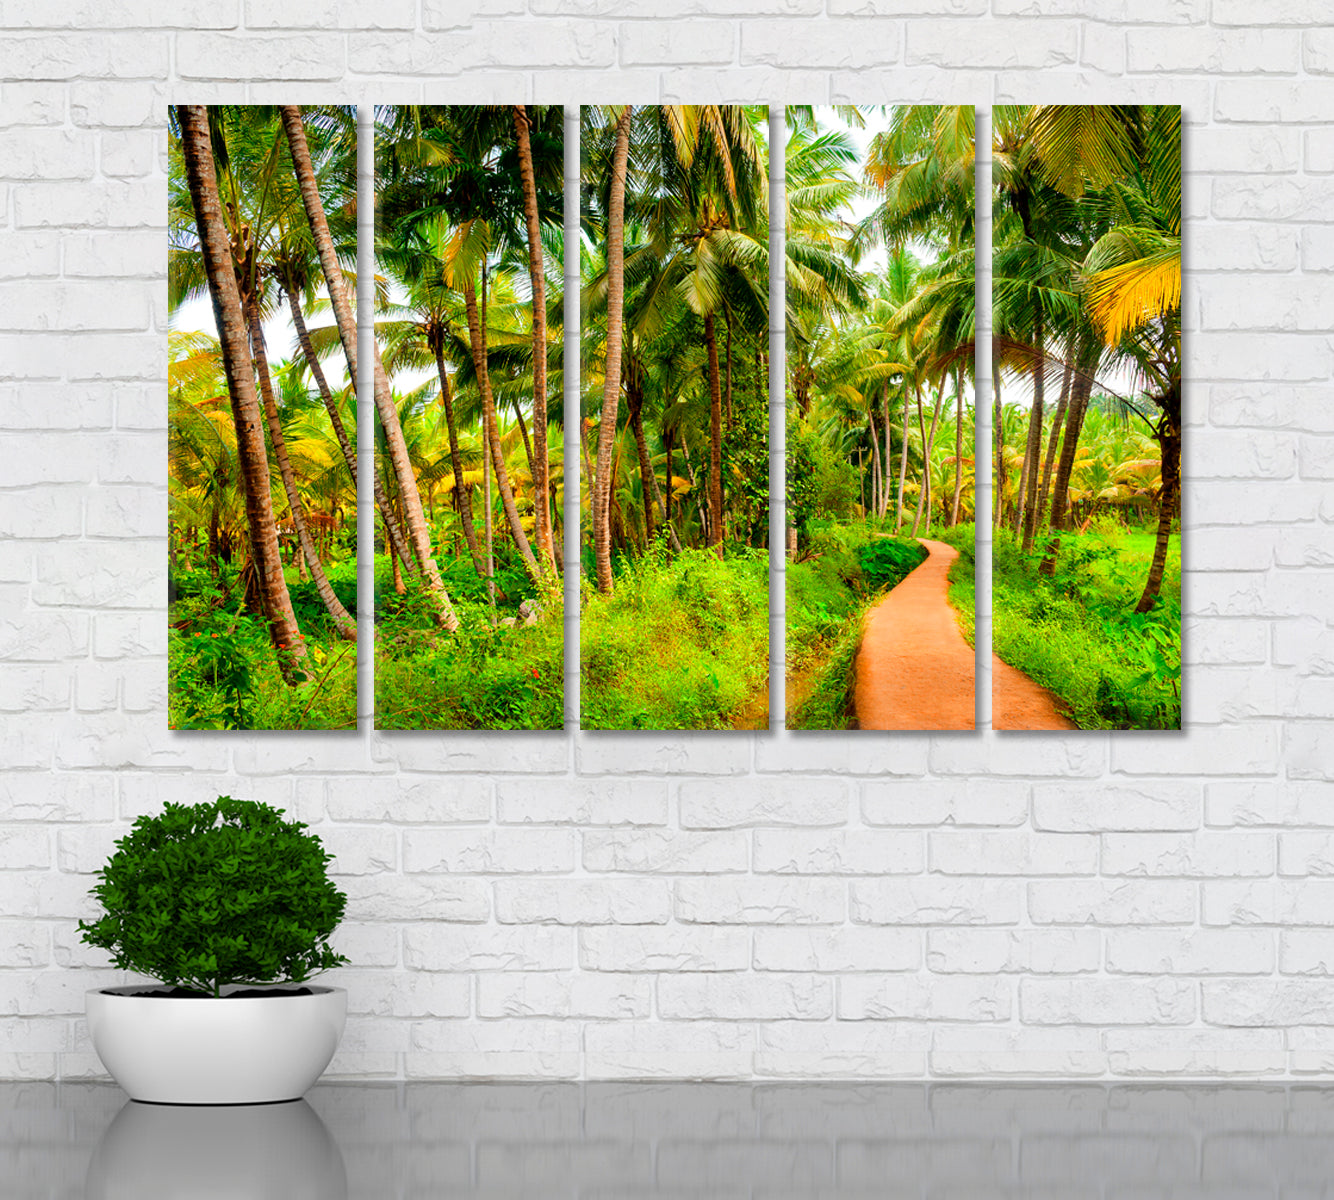 Beautiful Tropical Forests India Canvas Print ArtLexy 5 Panels 36"x24" inches 